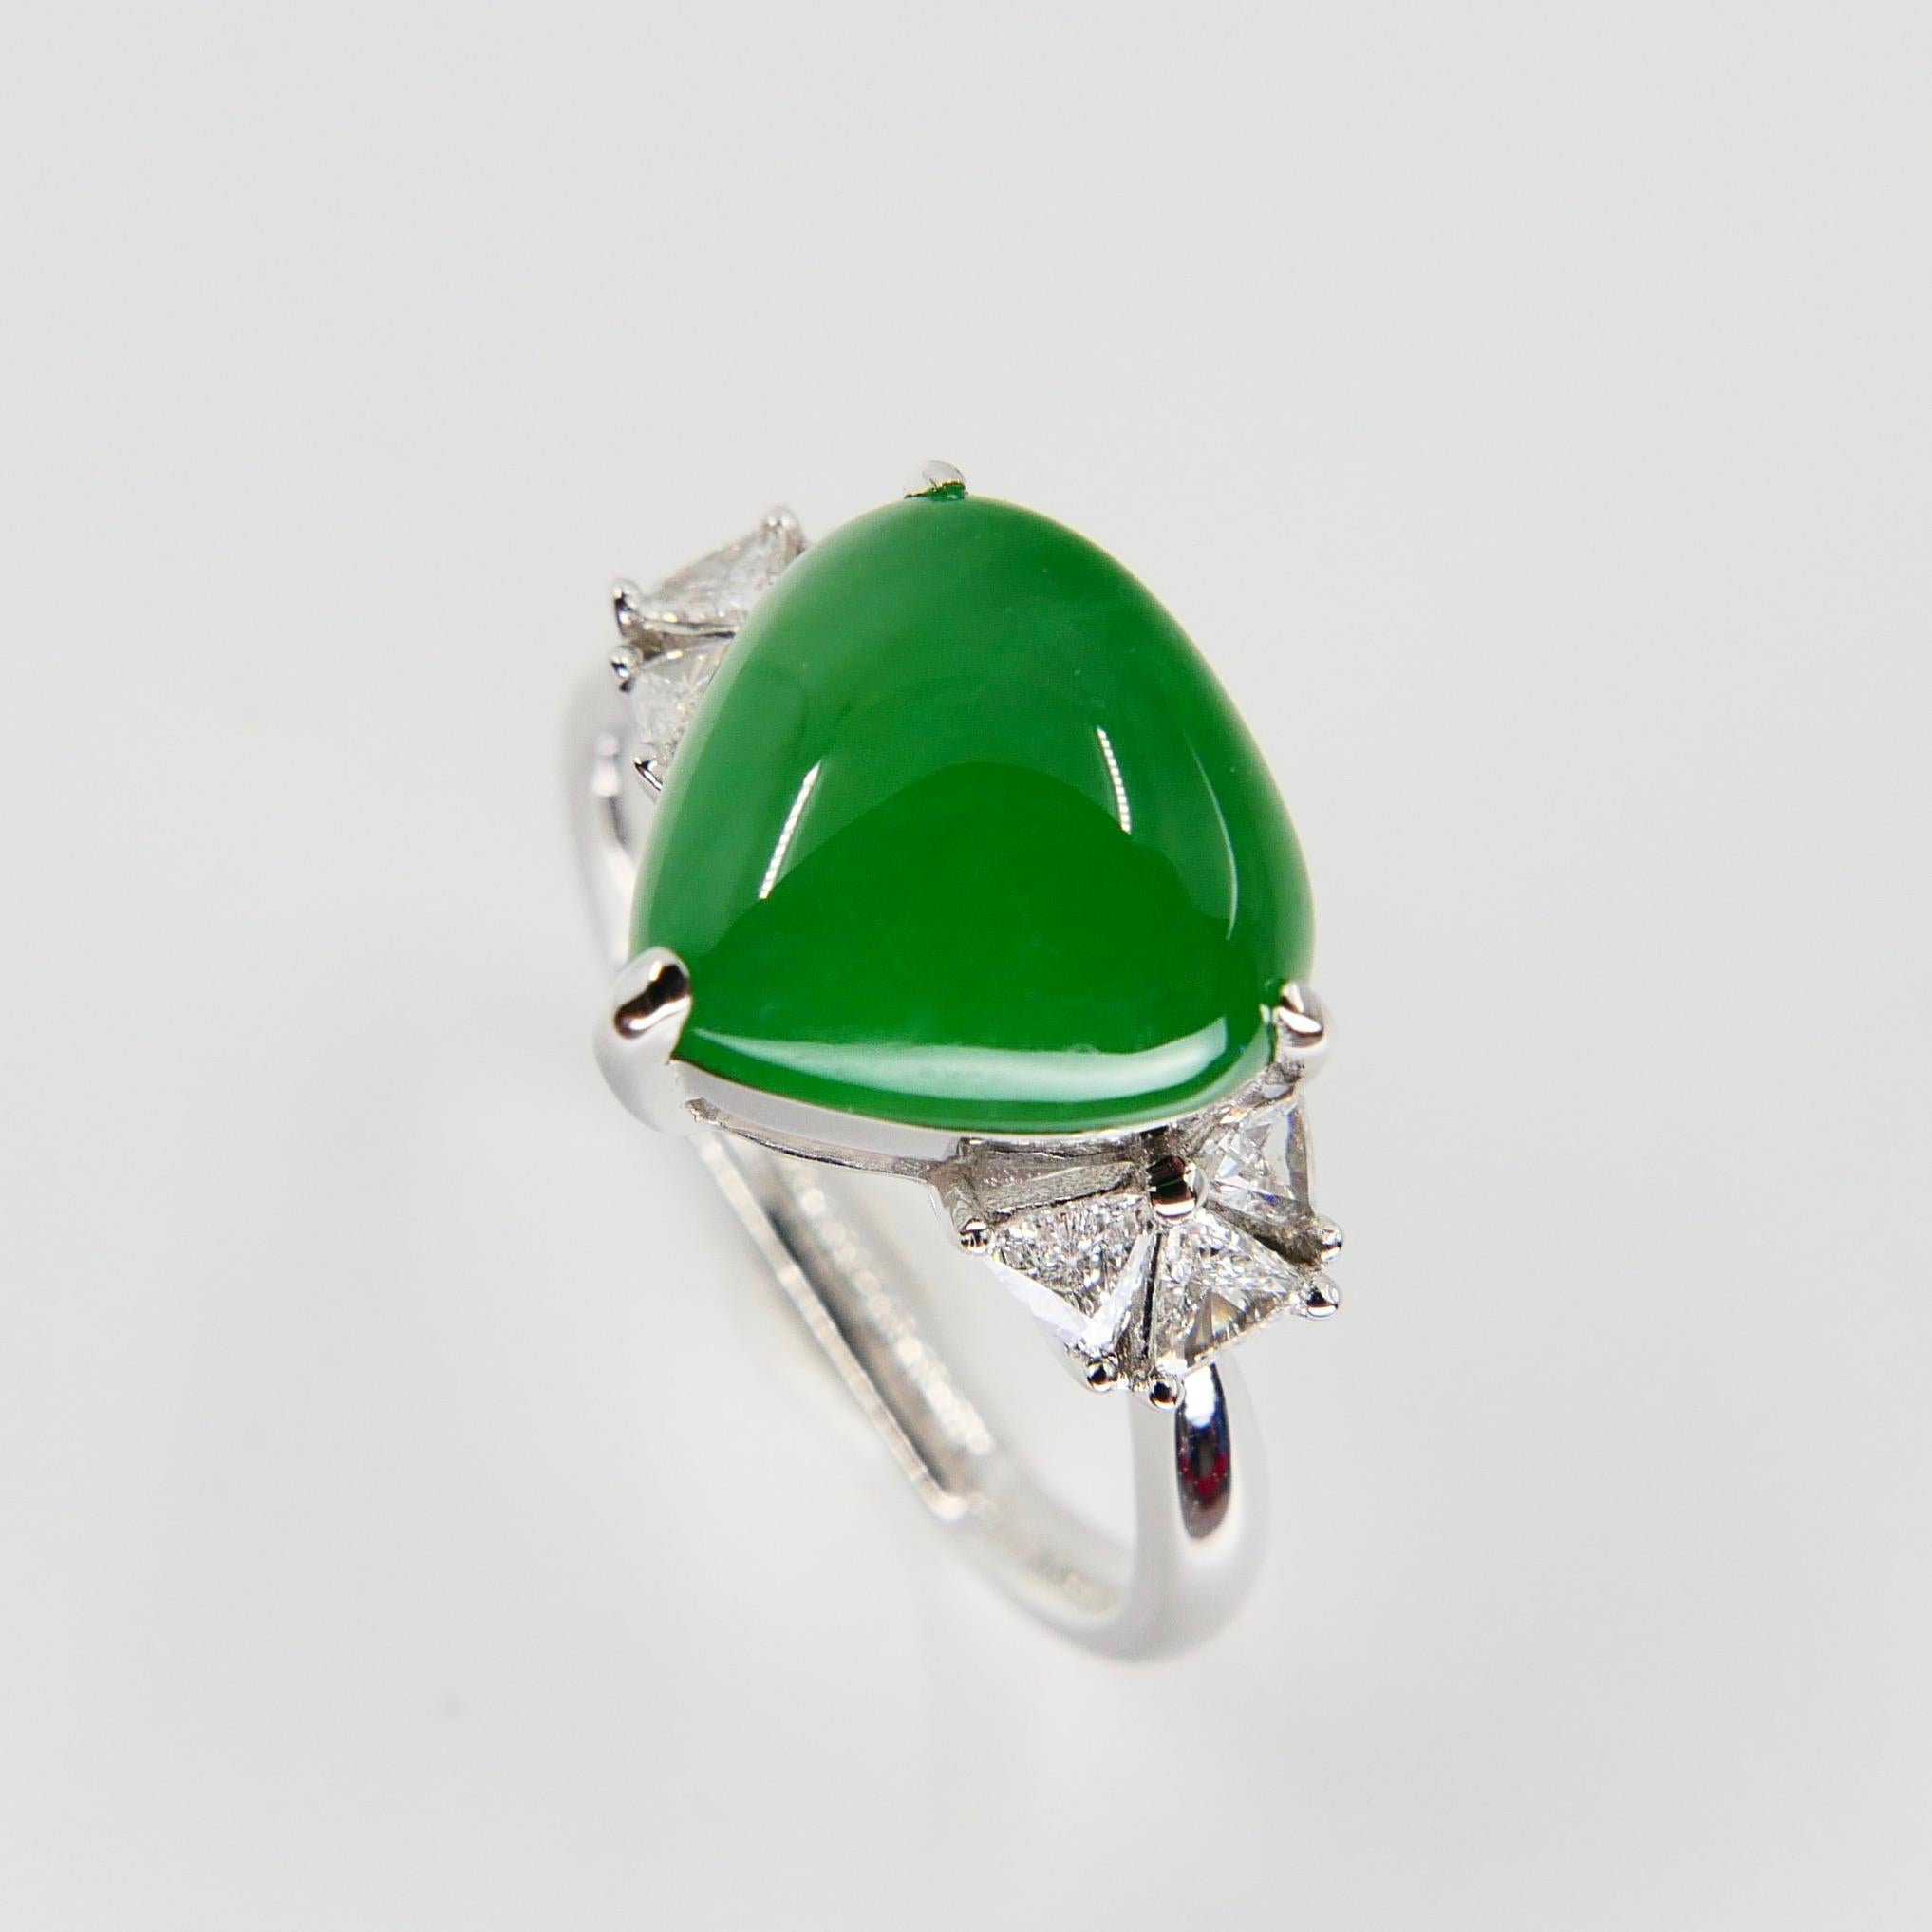 Trillion Cut Certified Natural Type A Jadeite Jade & Diamond Cocktail Ring, Apple Green Color